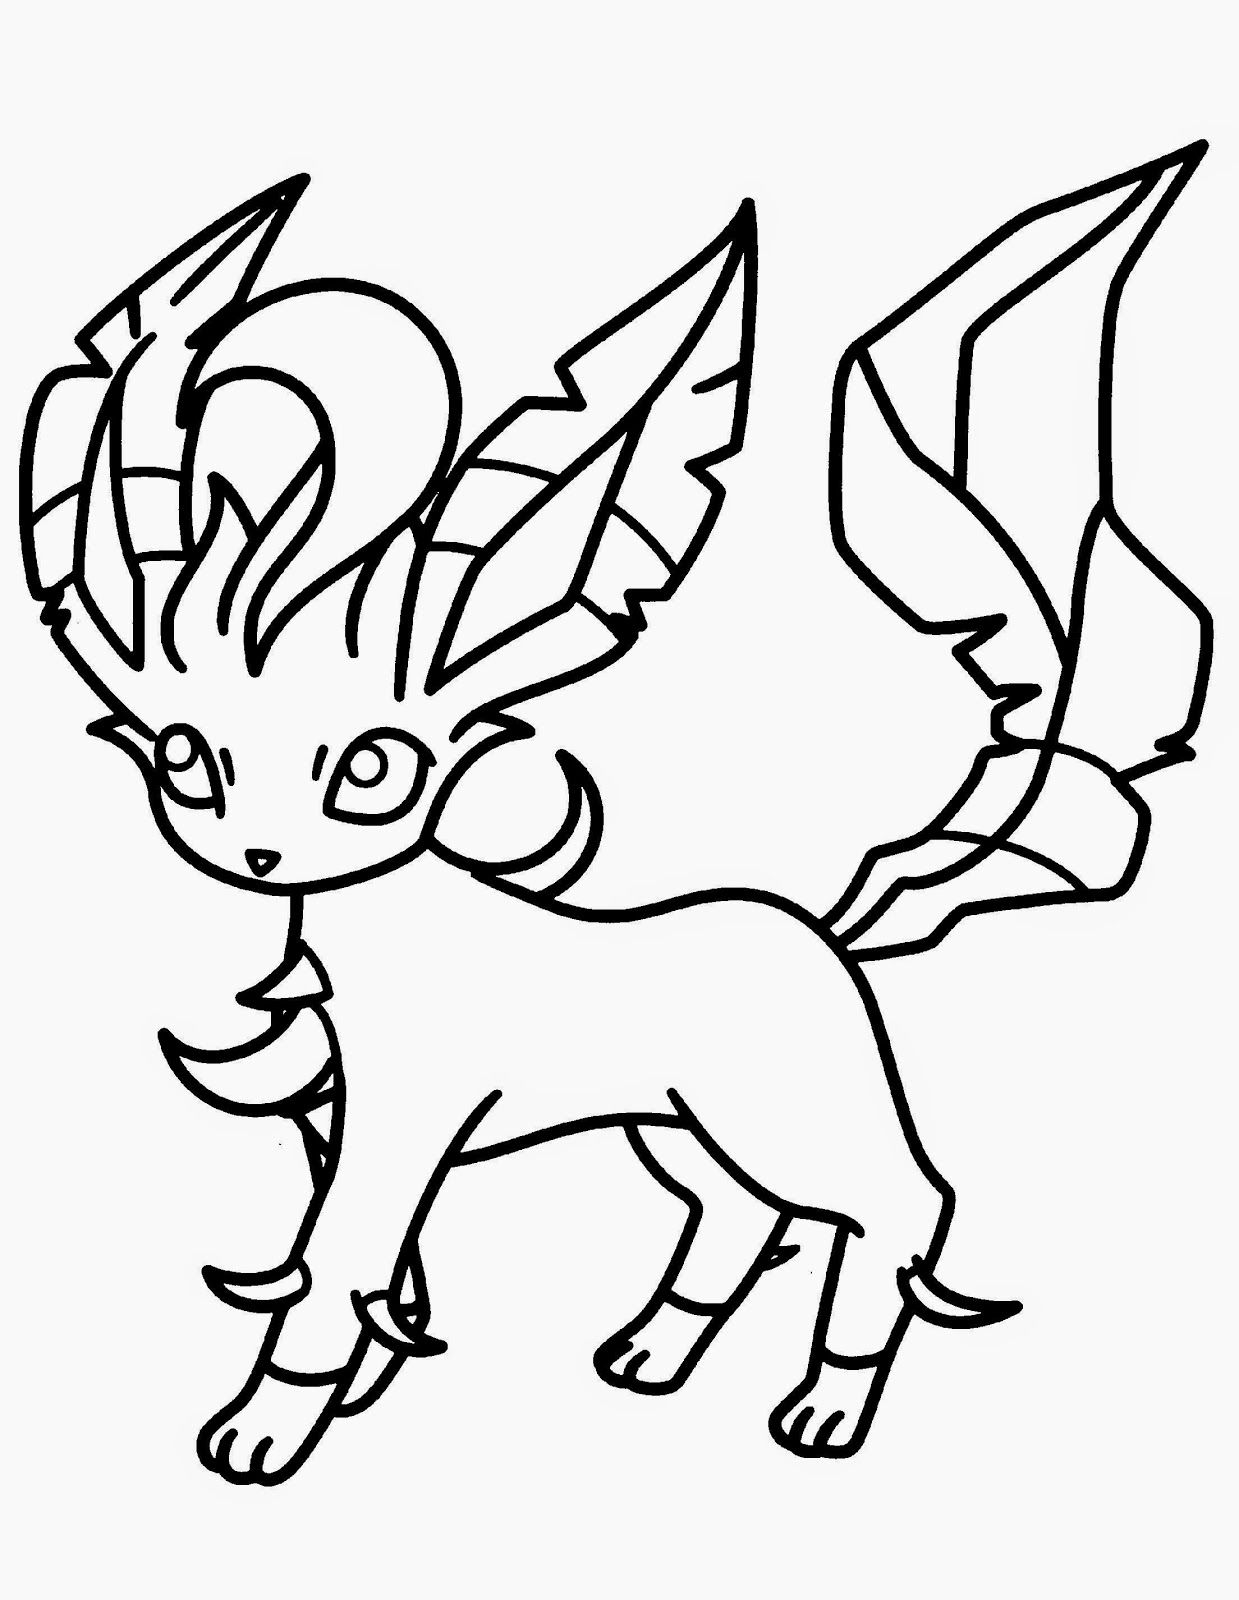 Coloring Pages Pokemon | Free Coloring Pages